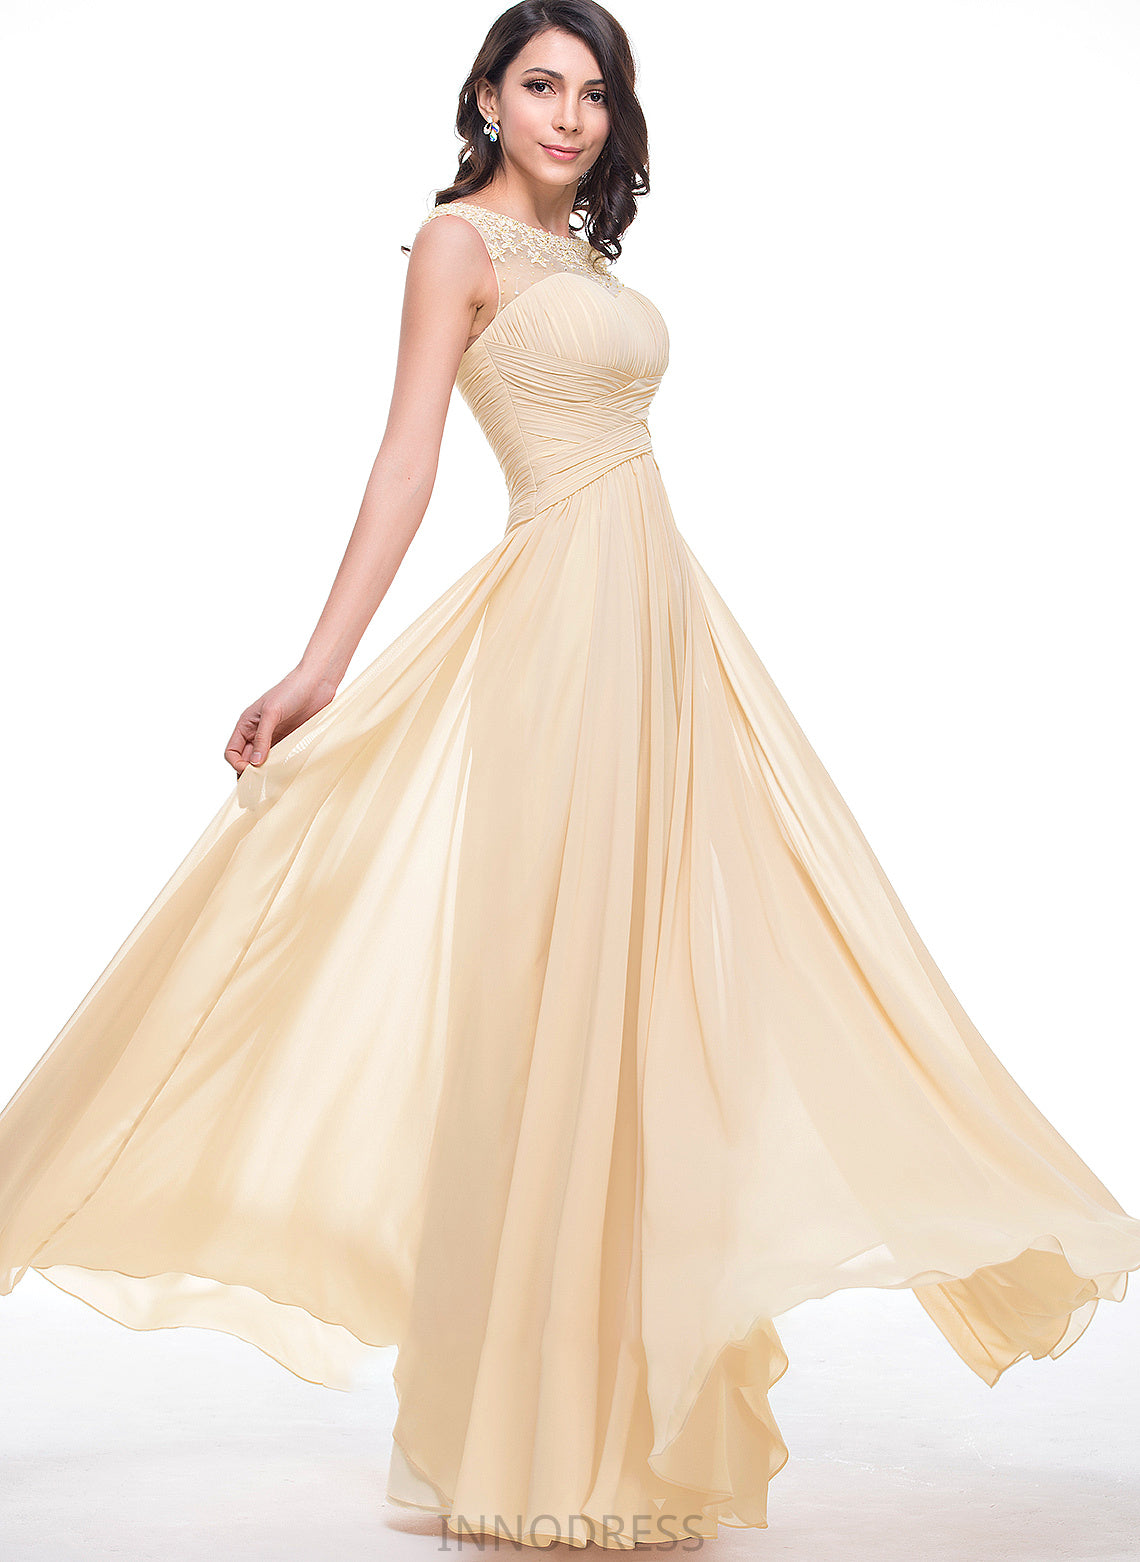 Prom Dresses A-Line Scoop With Flower(s) Floor-Length Neck Chiffon Ruffle Beading Nora